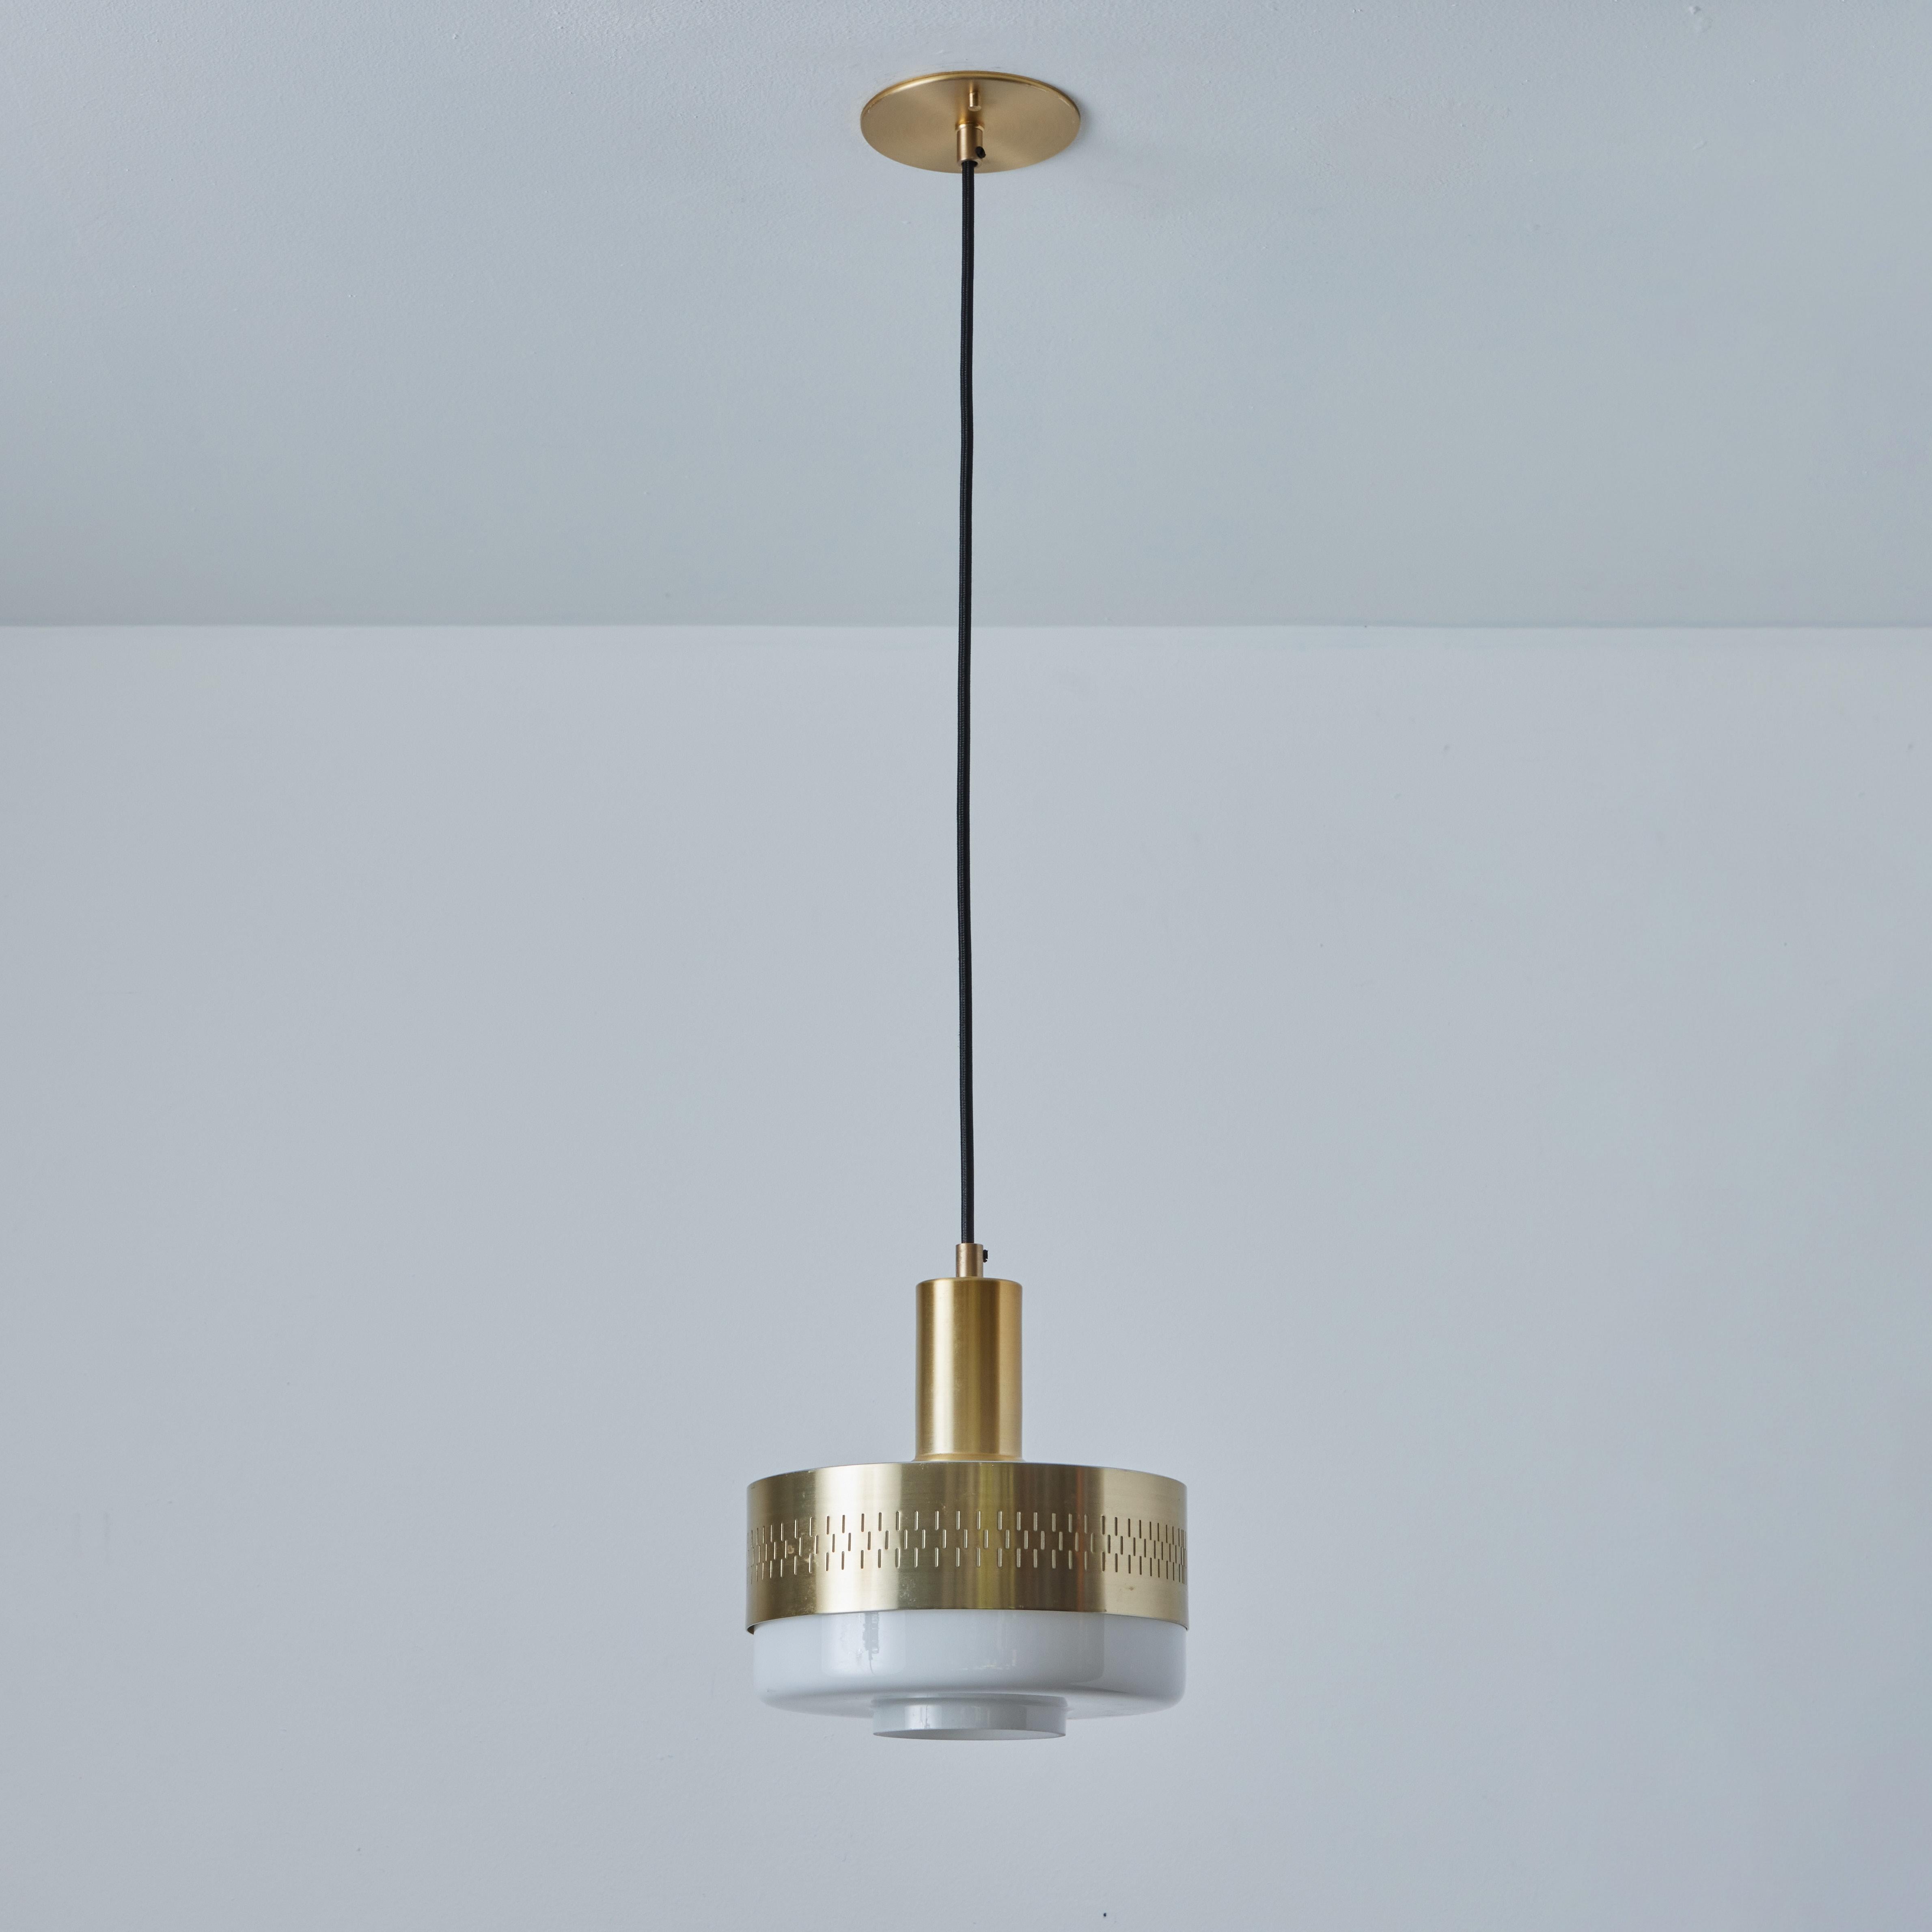 Suédois 1960s Perforated Brass & Glass Pendant Attributed to Hans-Agne Jakobsson en vente